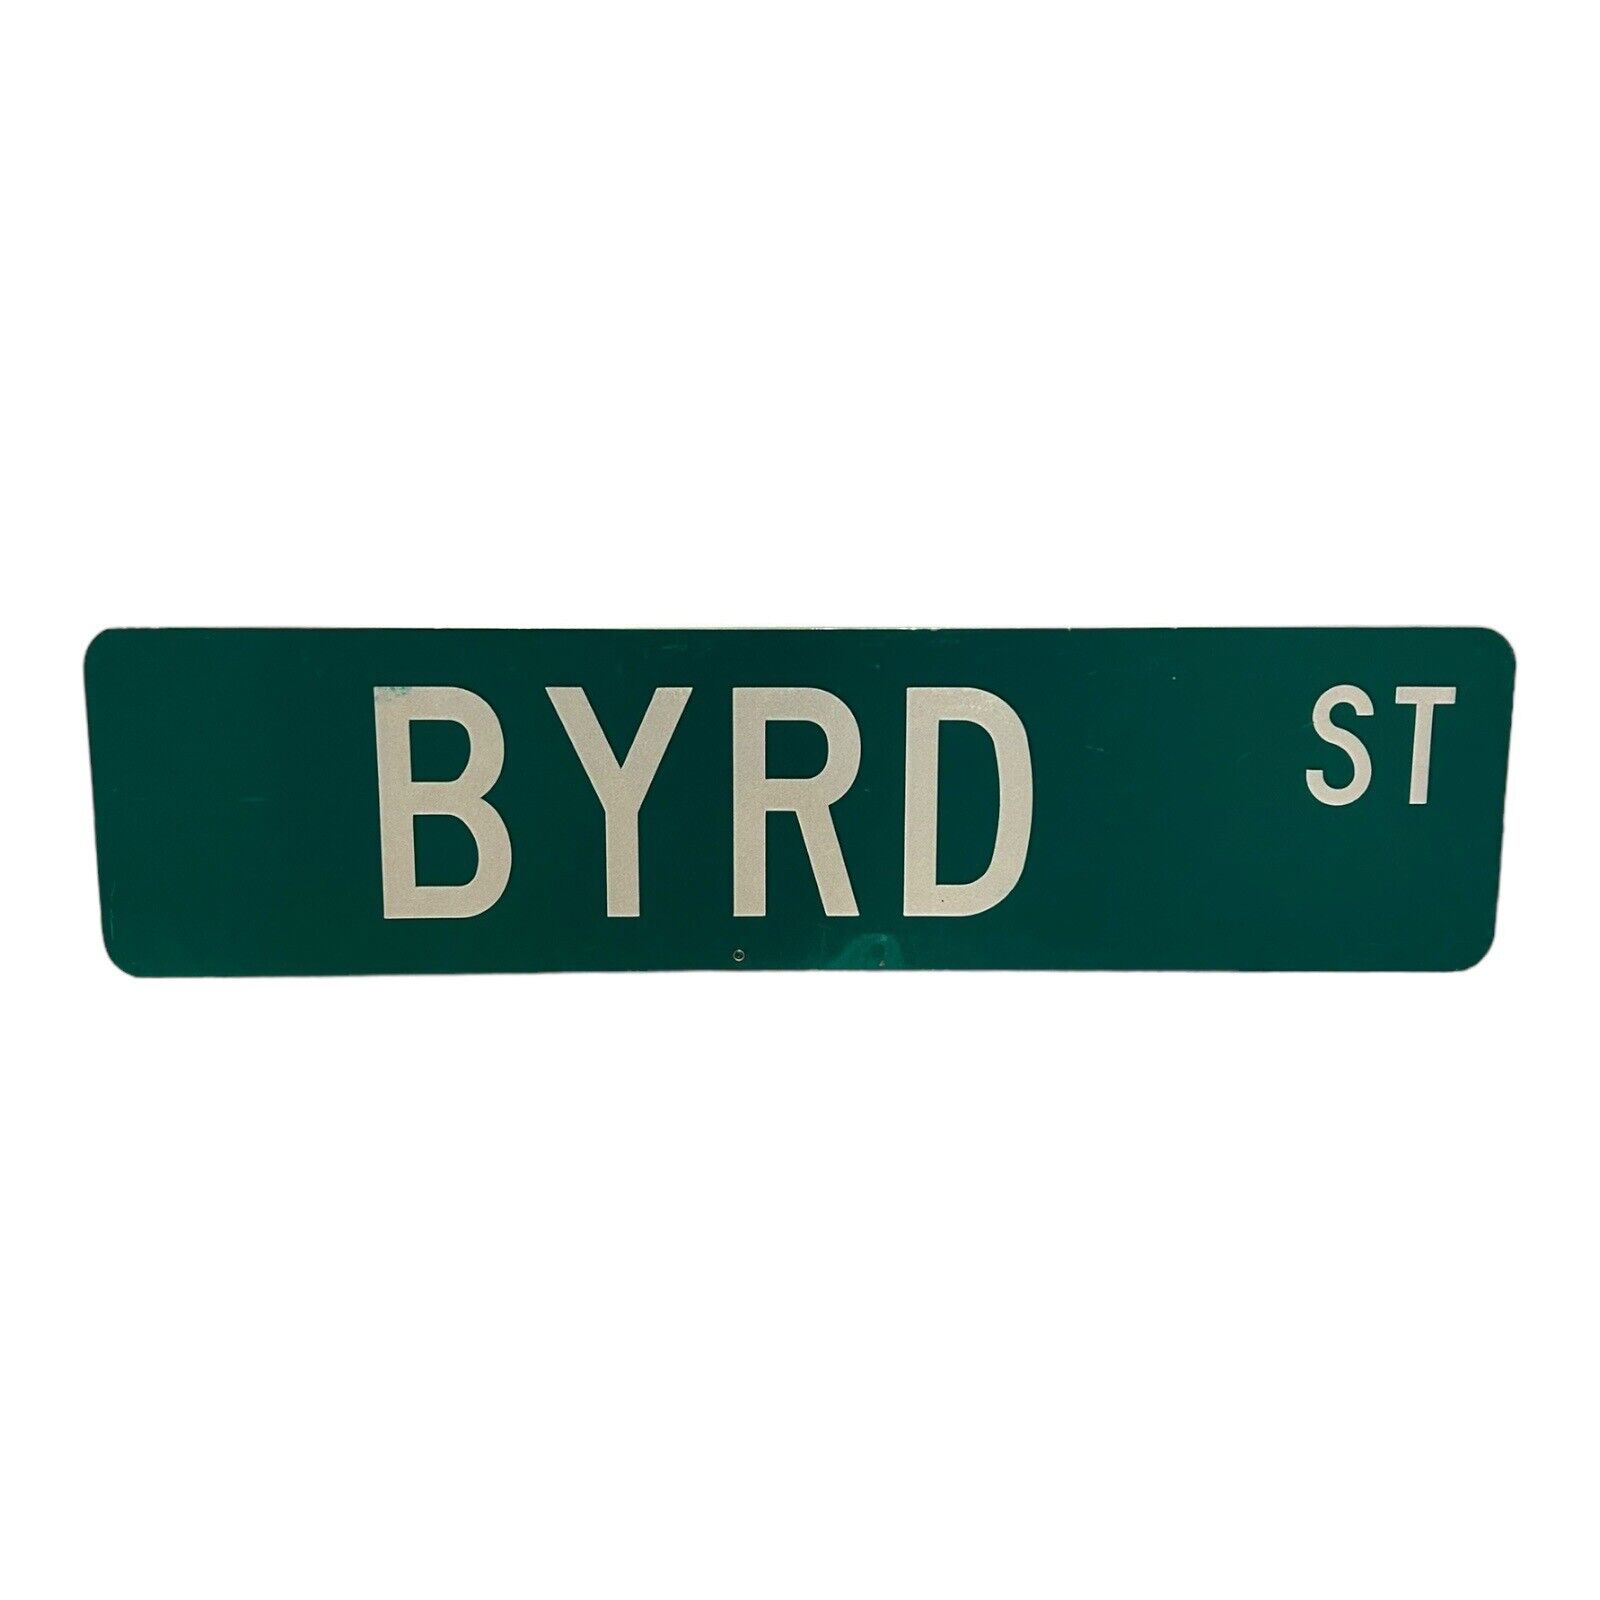 BYRD Street Metal Sign, Official, Metal Street Sign, 24 x6 Inches